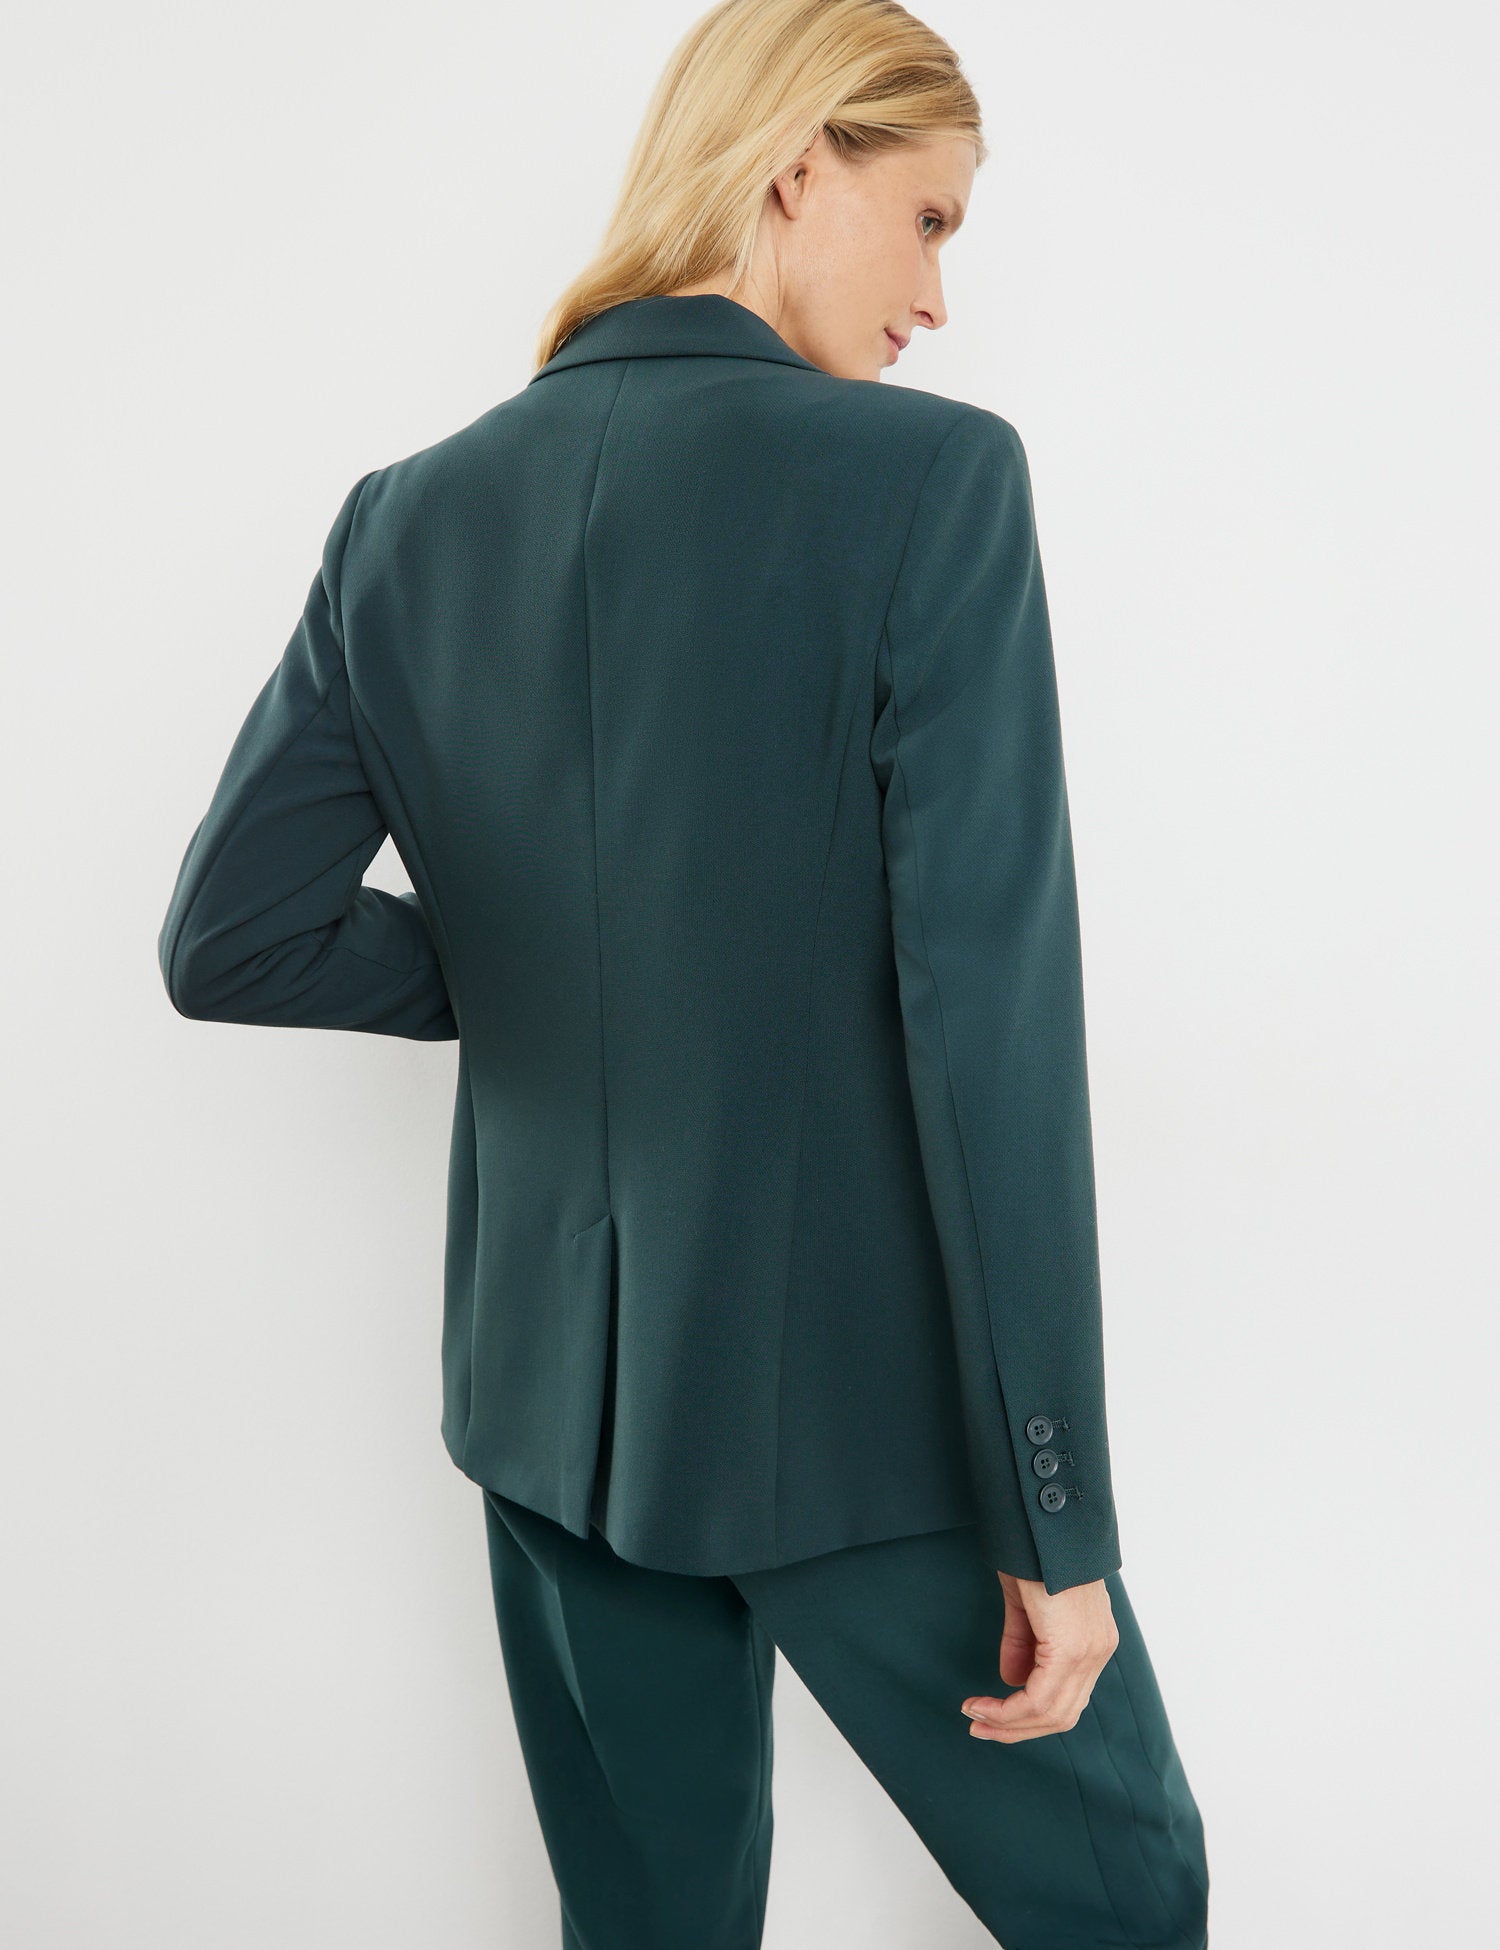 Classic Blazer With A Back Vent_230044-31340_50939_06